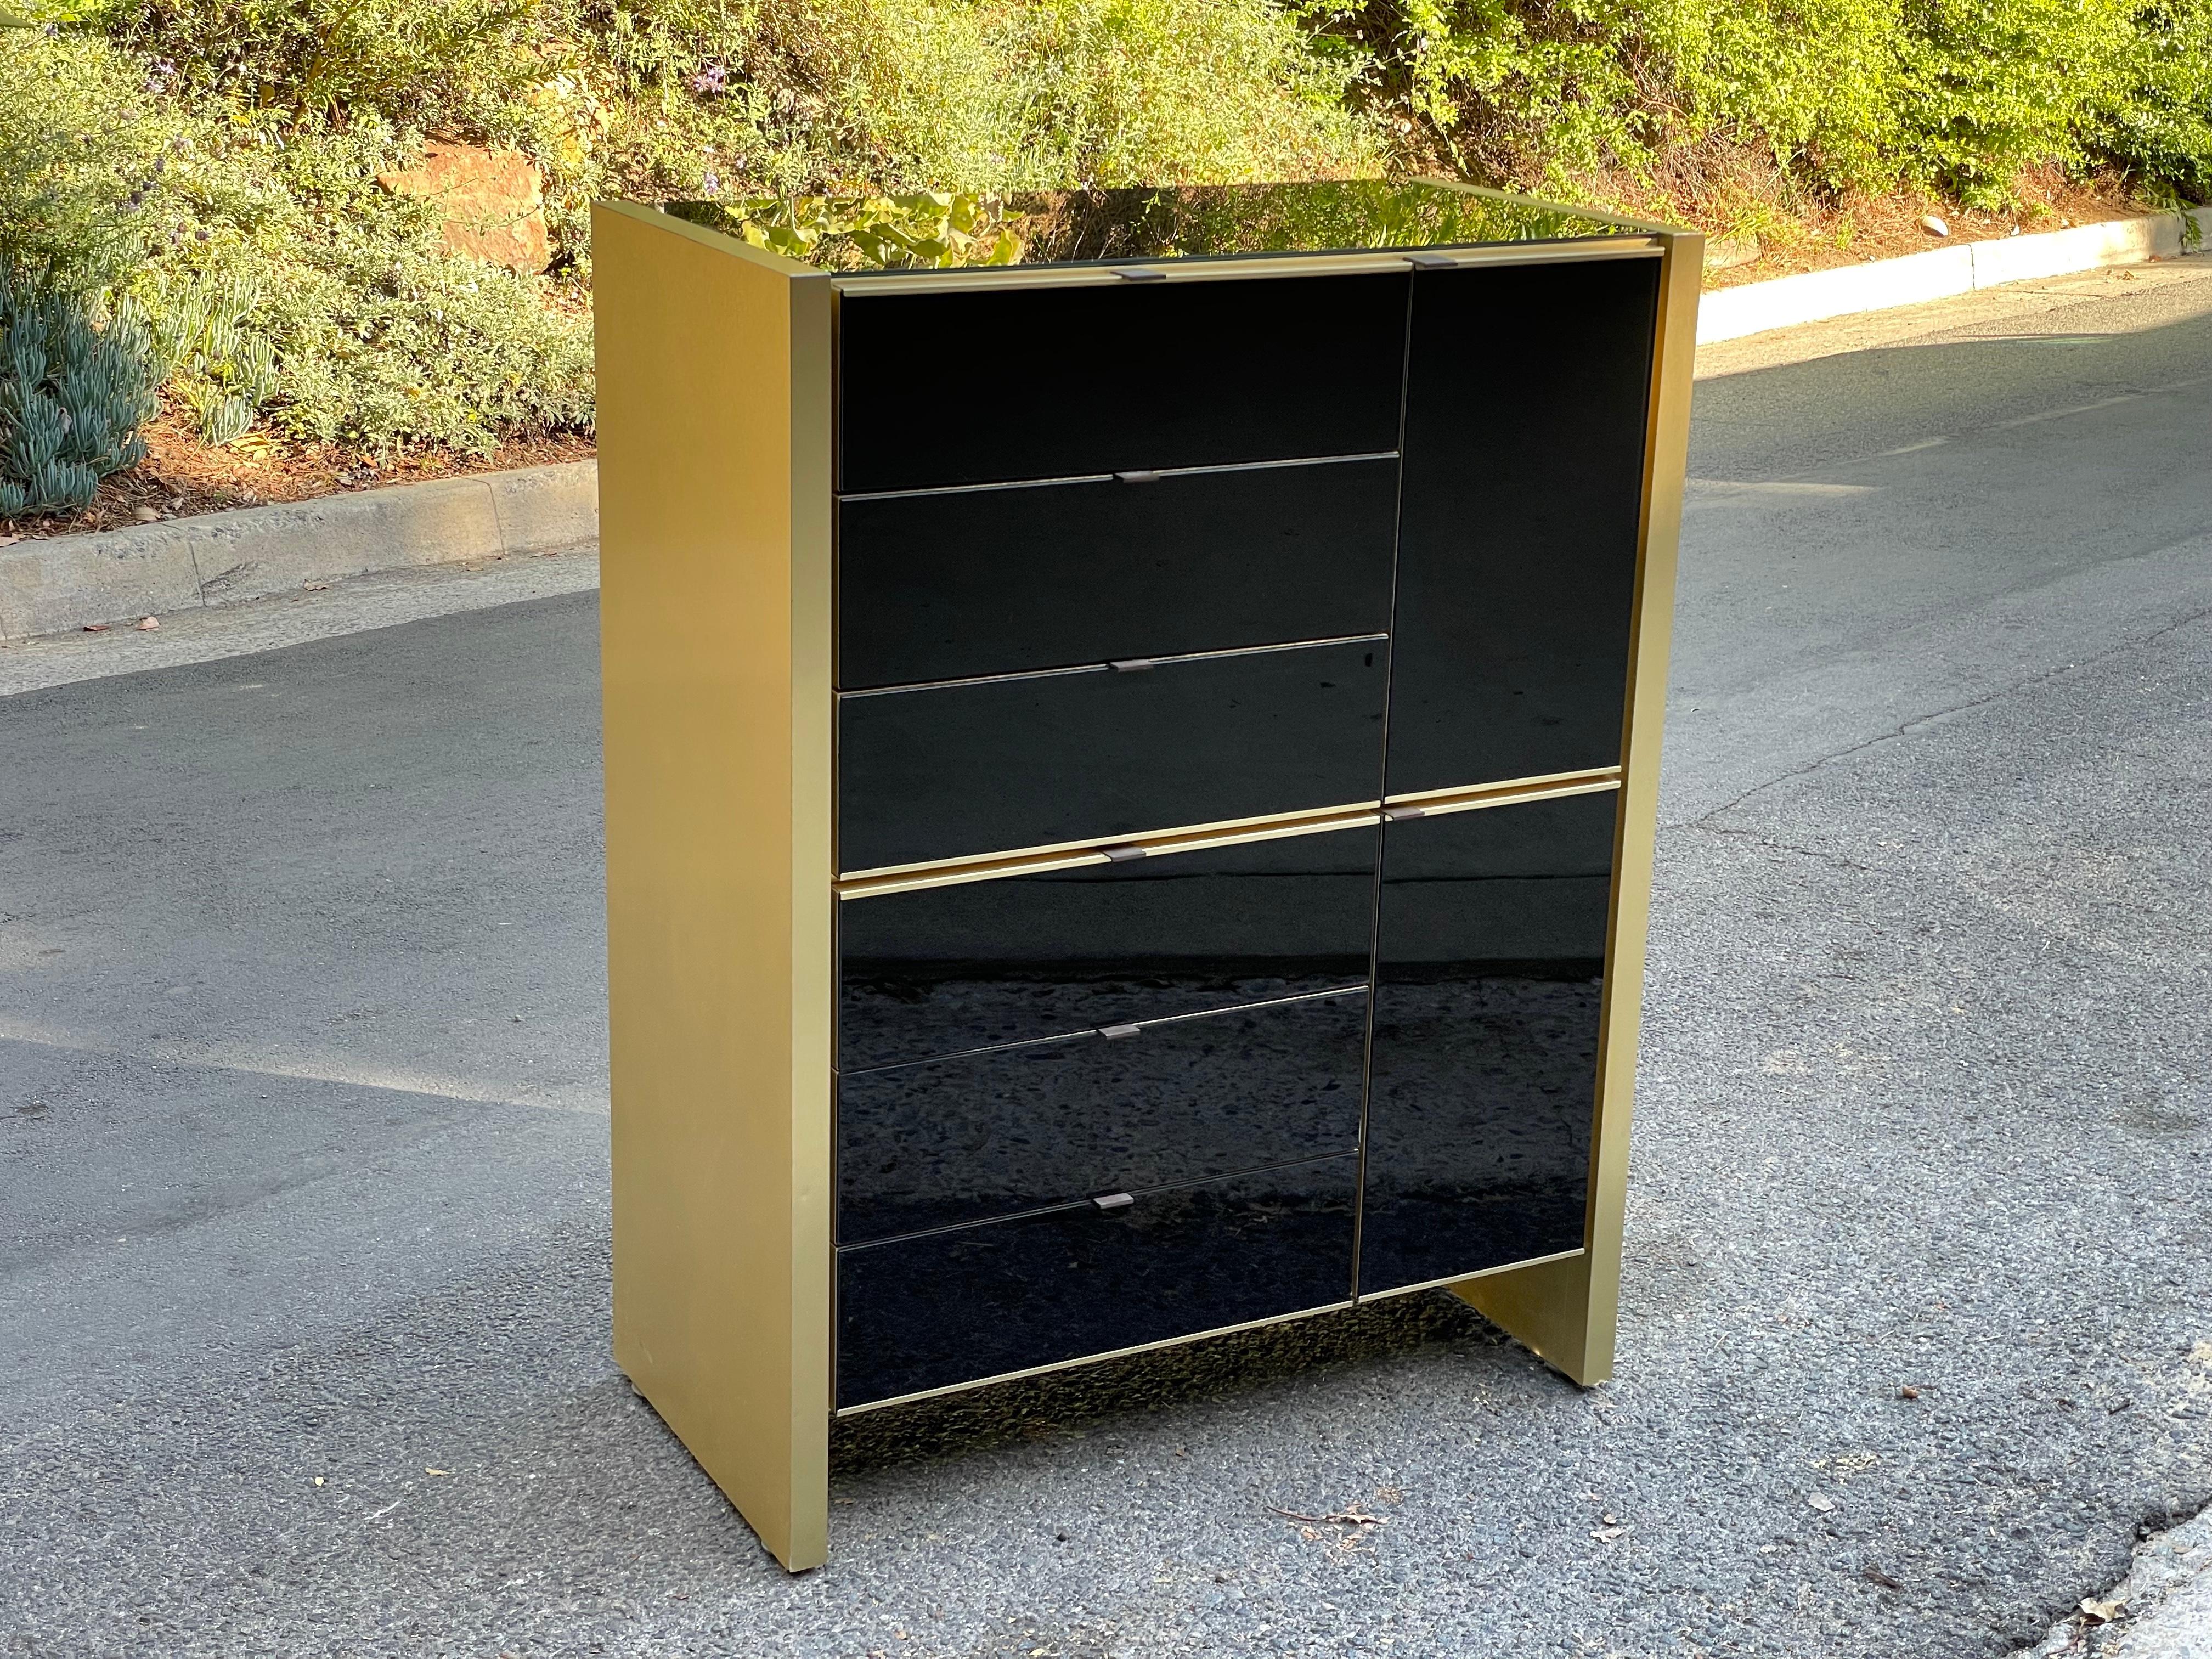 Spectacular post modern black and brass dresser / credenza / cabinet with glass faced front and top with heavy brass sides.

Steel drawer glides. Double cabinet doors. Manufactured by Ello Furniture, circa 1970s.

This black glass and brass has